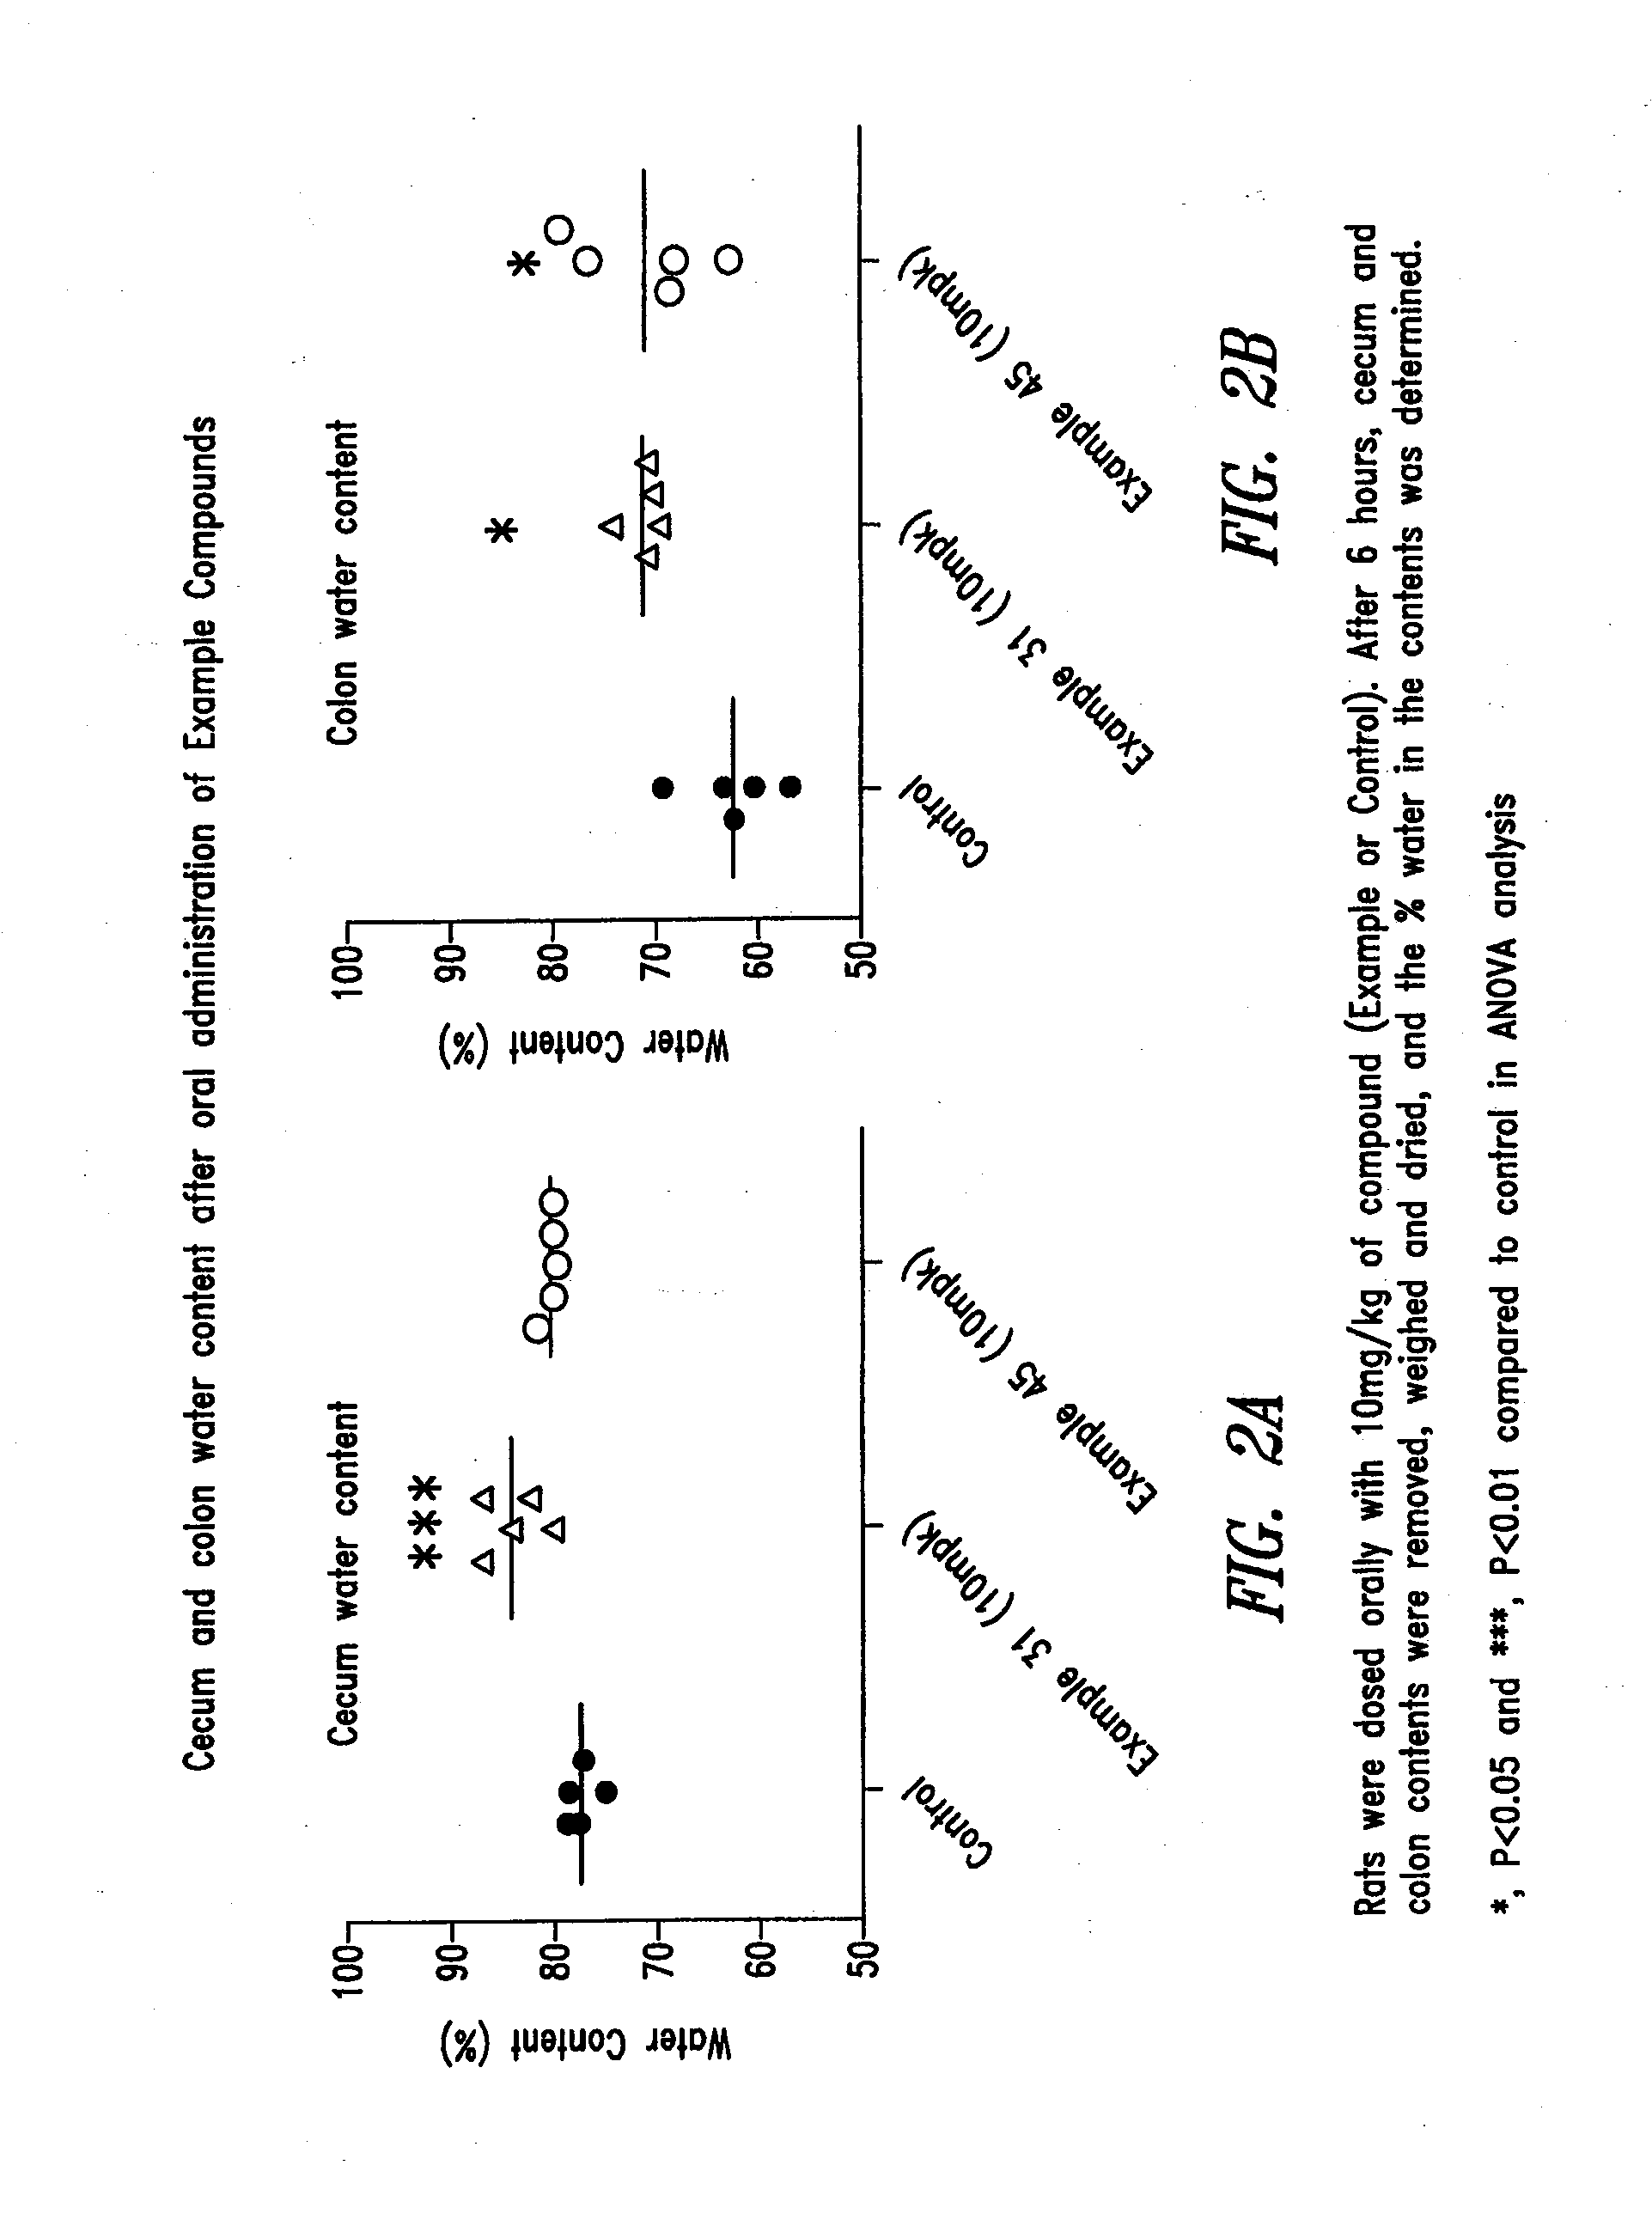 Compounds and methods for inhibiting nhe-mediated antiport in the treatment of disorders associated with fluid retention or salt overload and gastrointestinal tract disorders